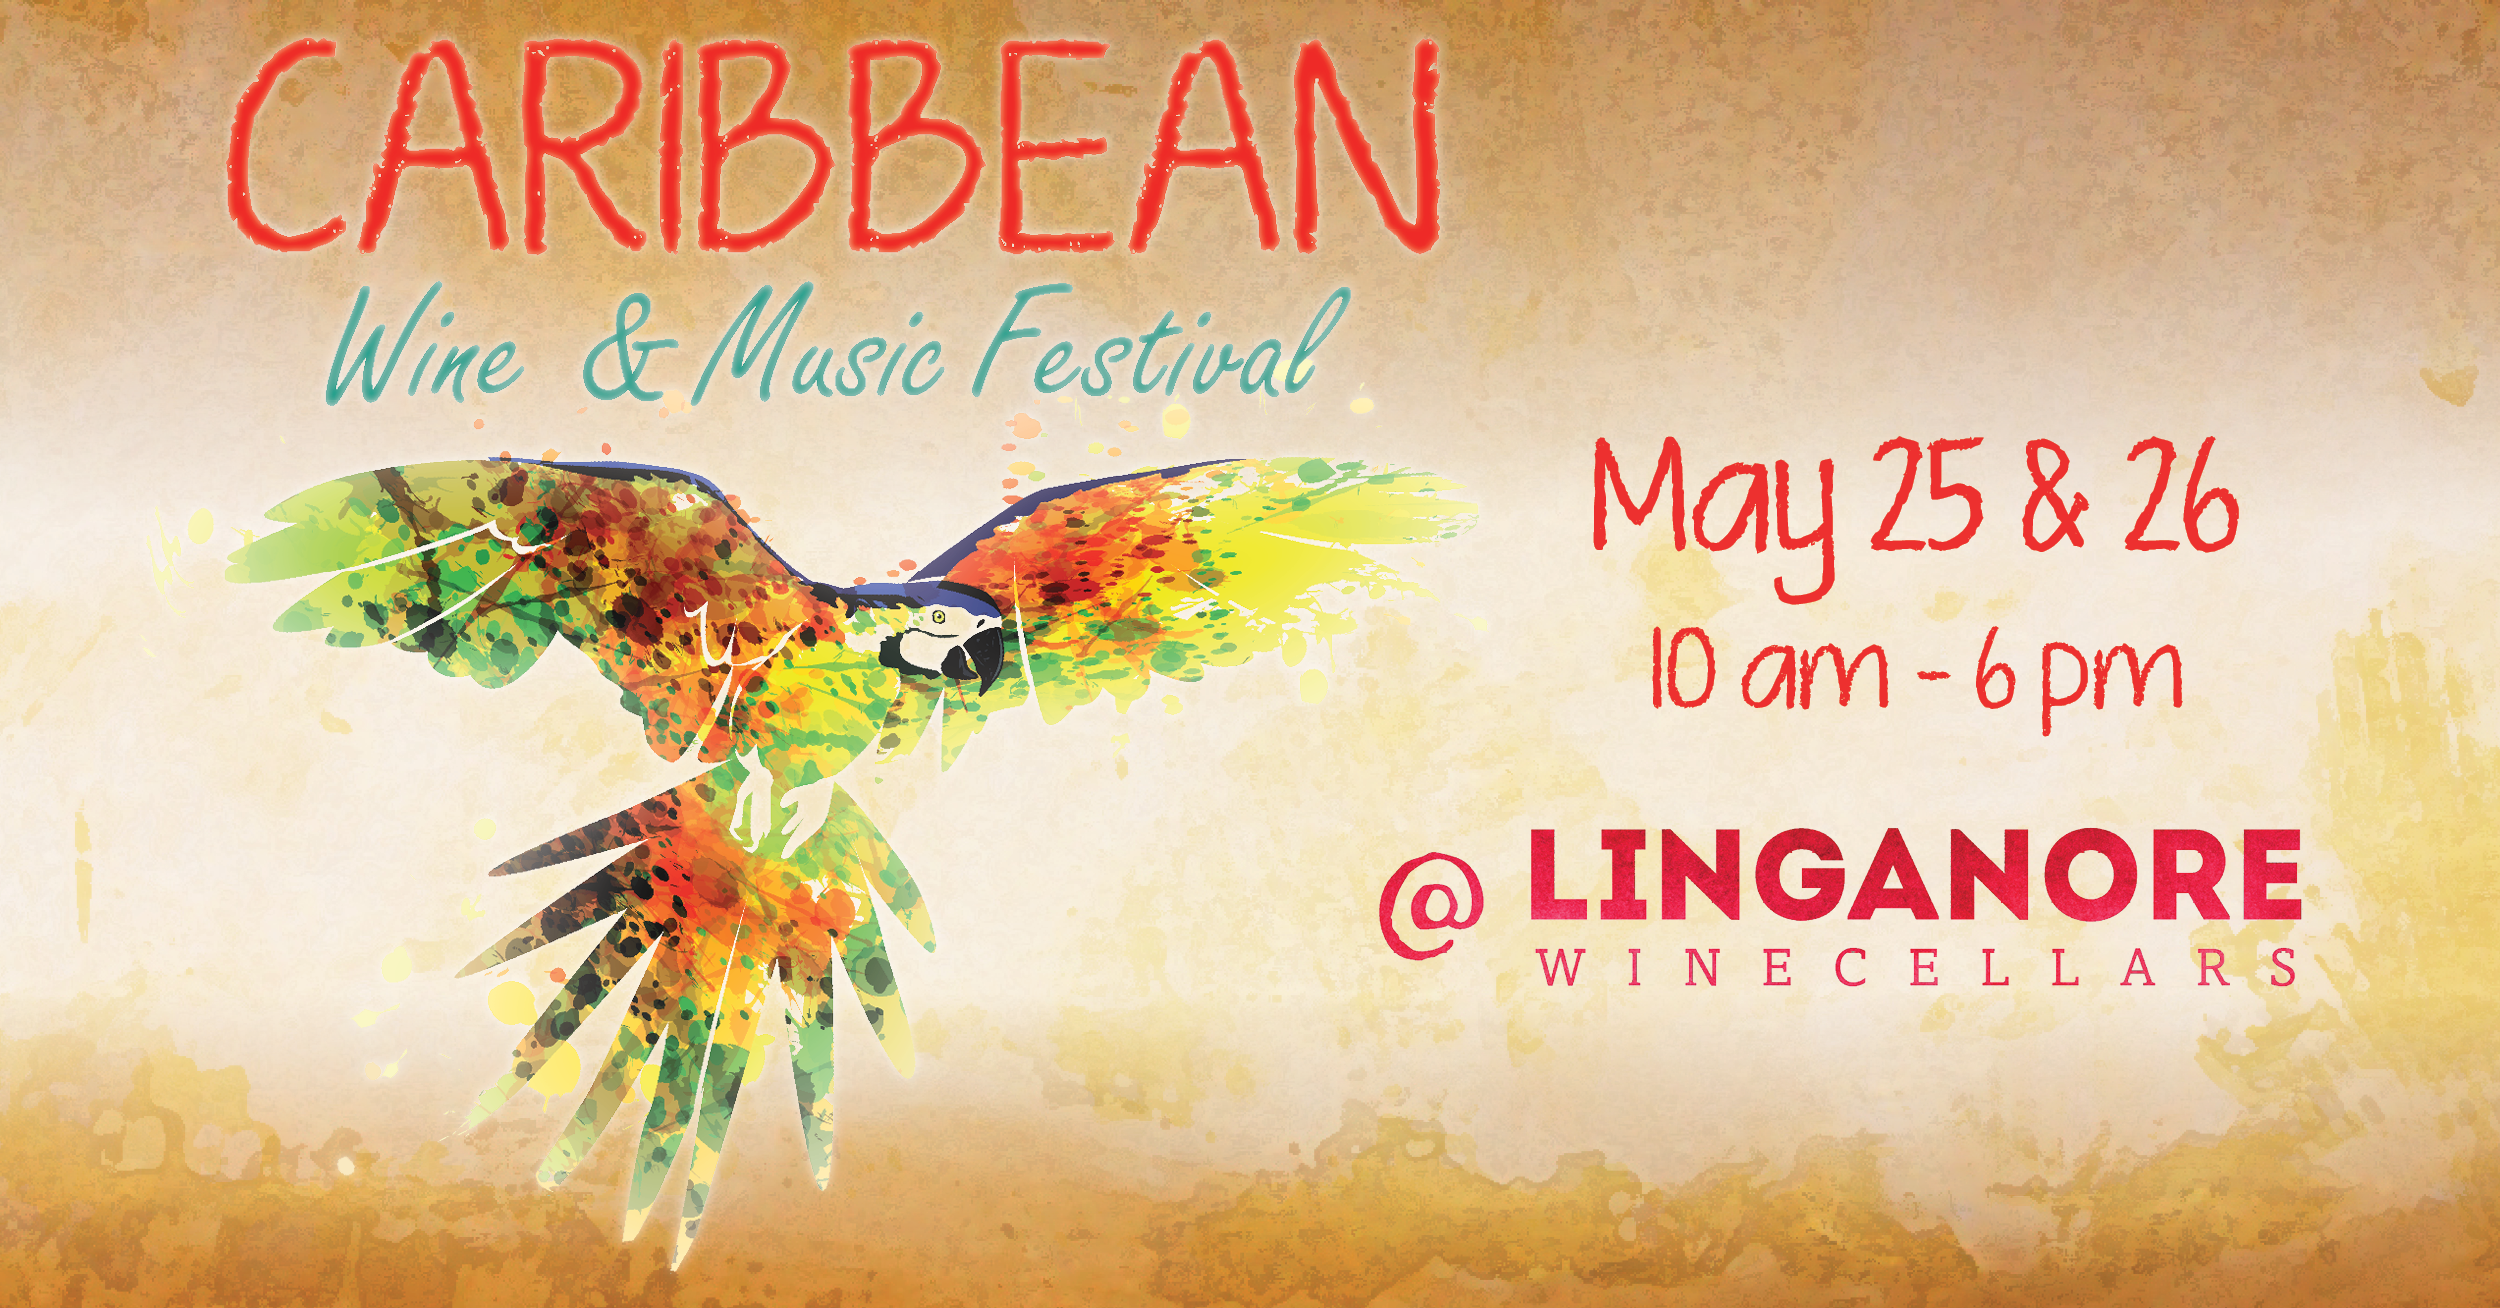 Caribbean Festival is May 25 and 26